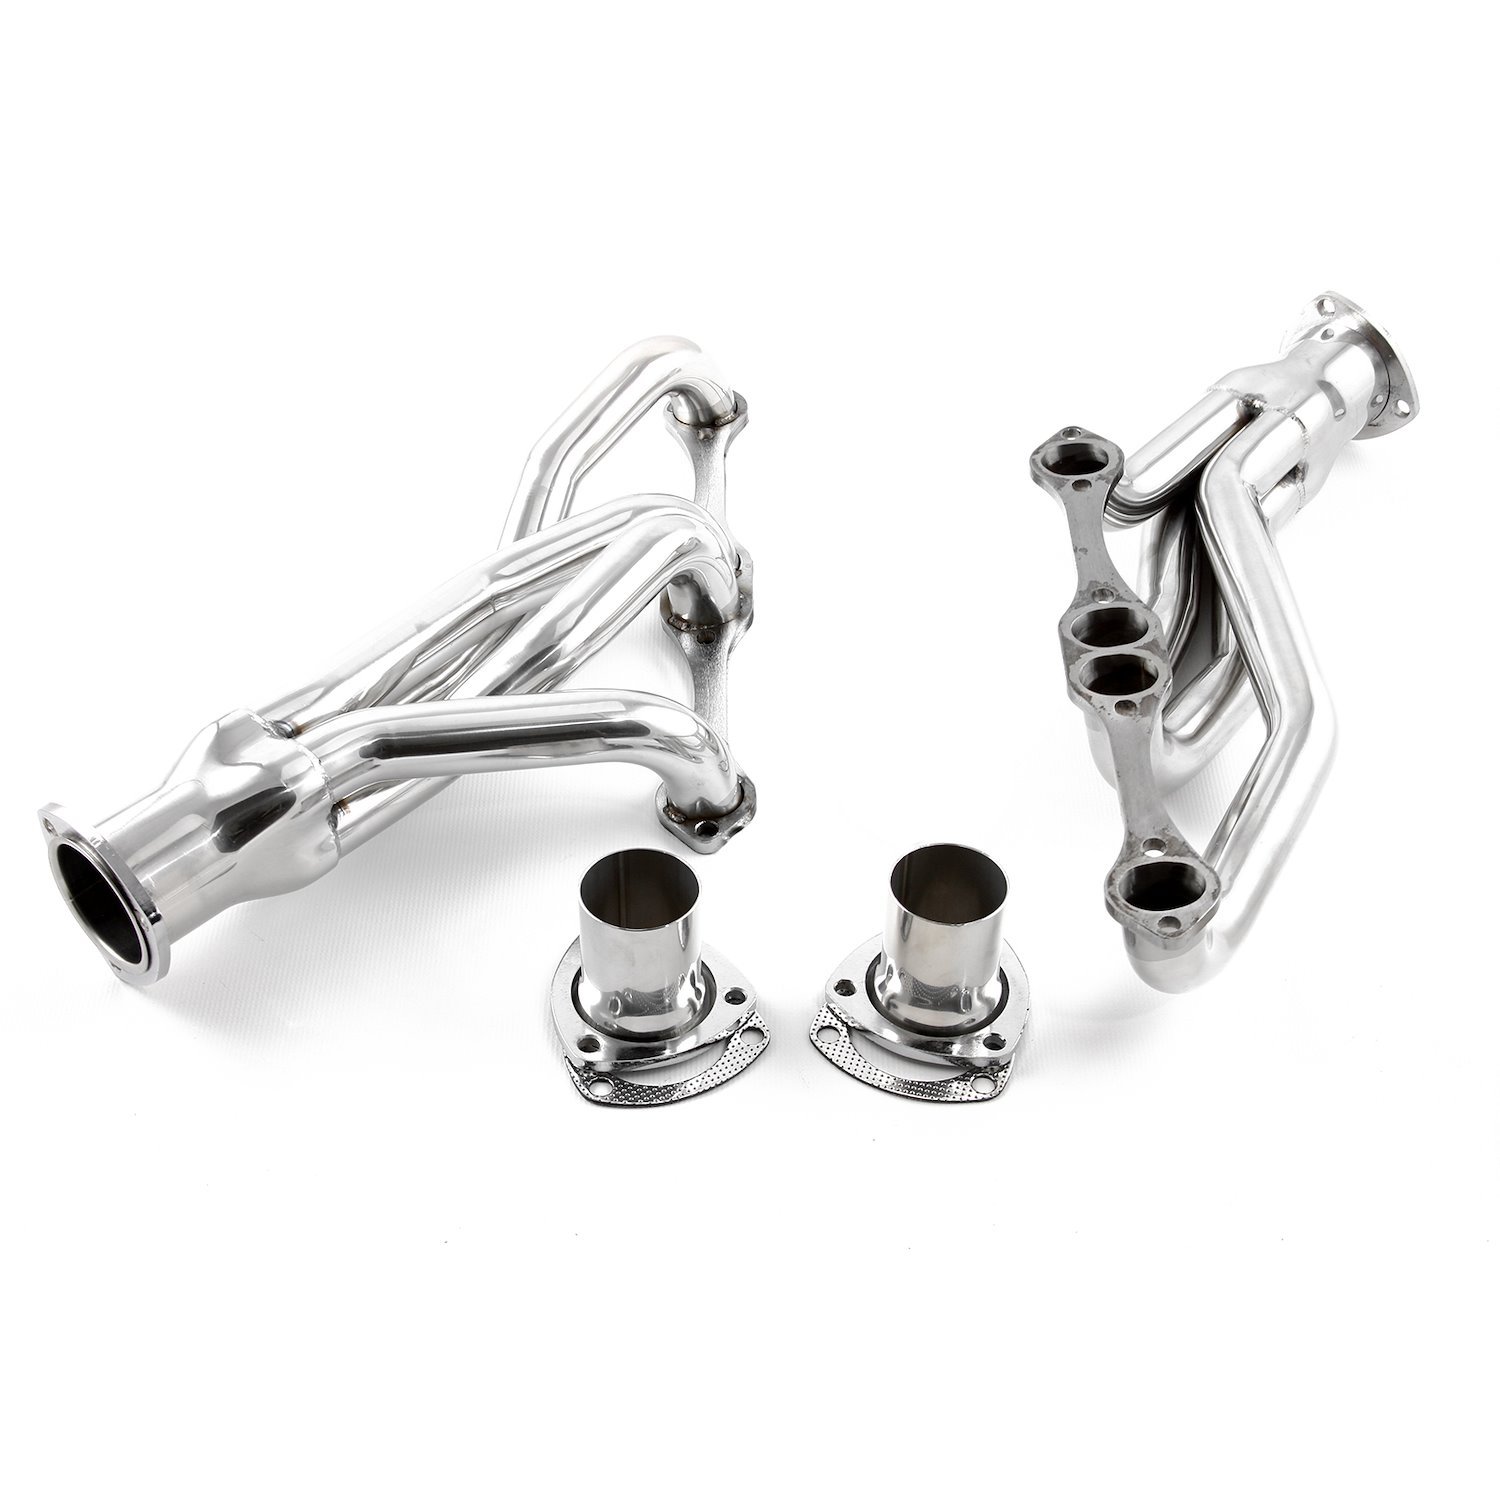 Mid-Length Exhaust Headers 1988-1995 Small Block Chevy 350 Truck